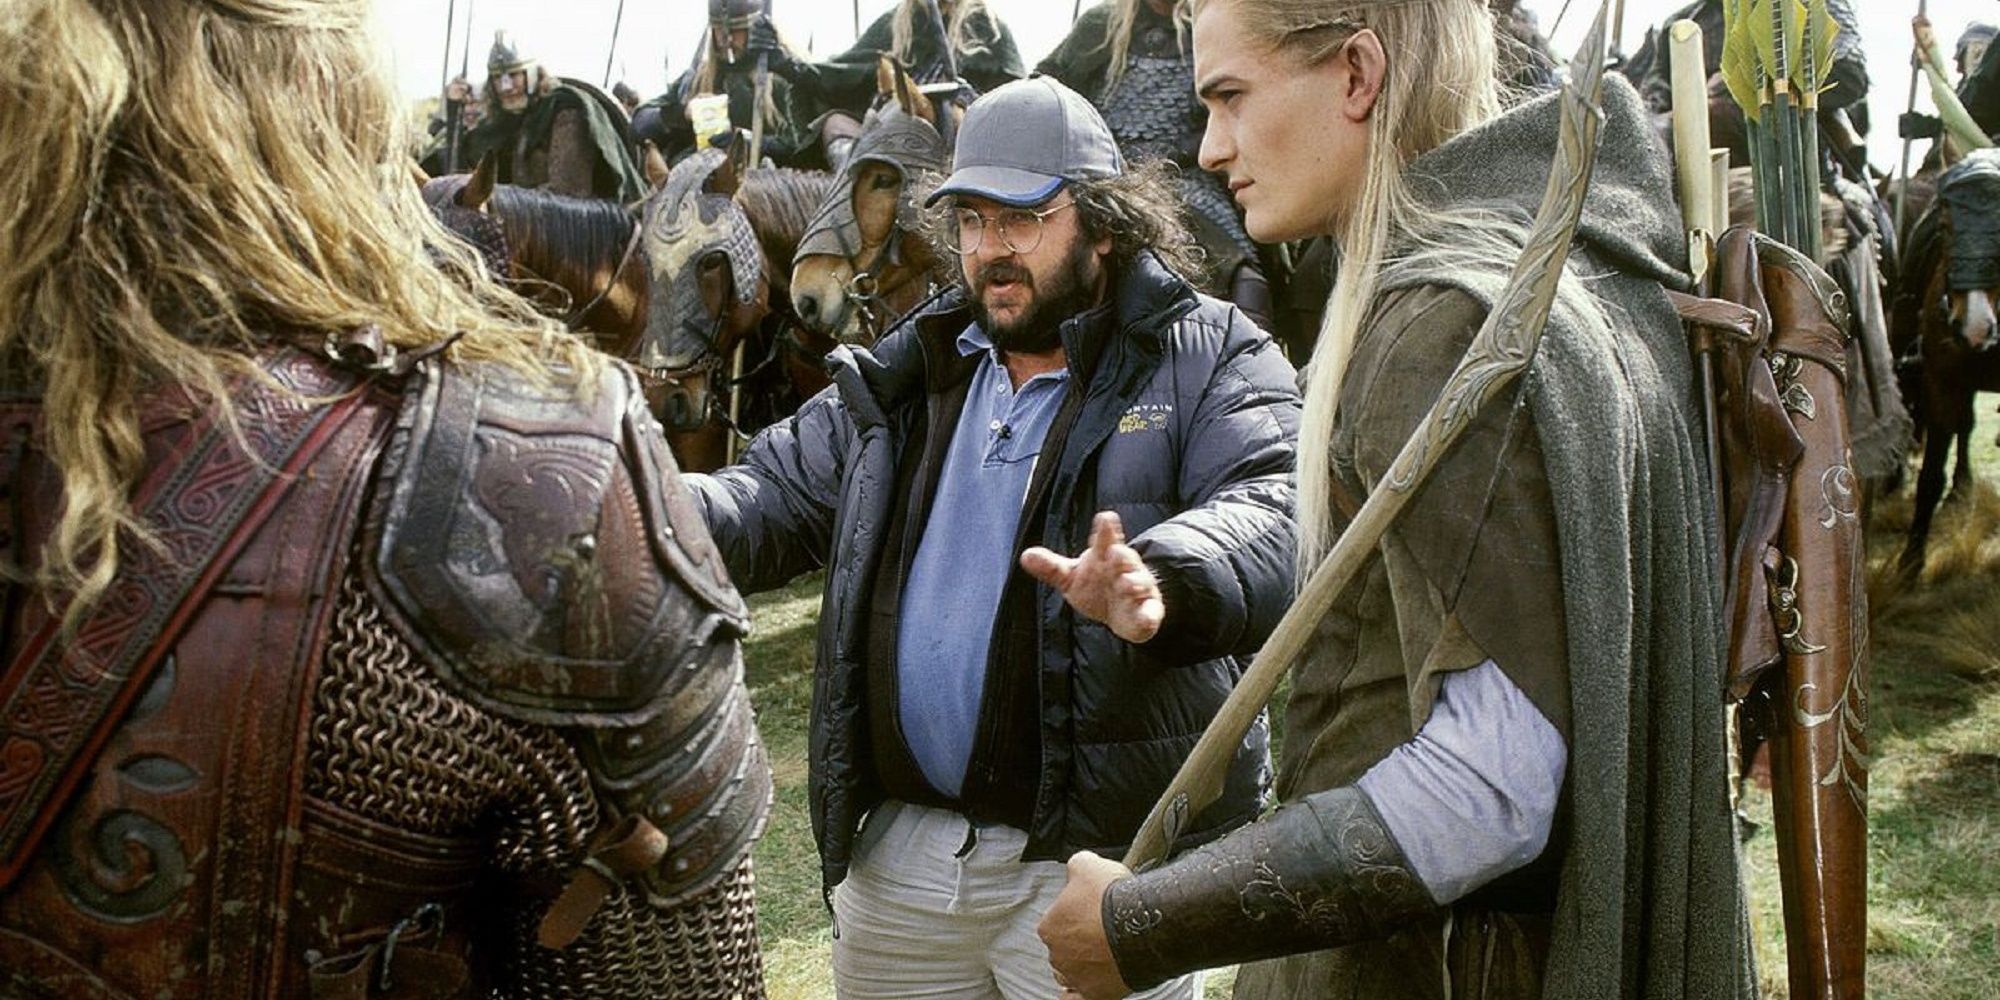 Peter Jackson with Legolas on set of The Lord of the Rings.